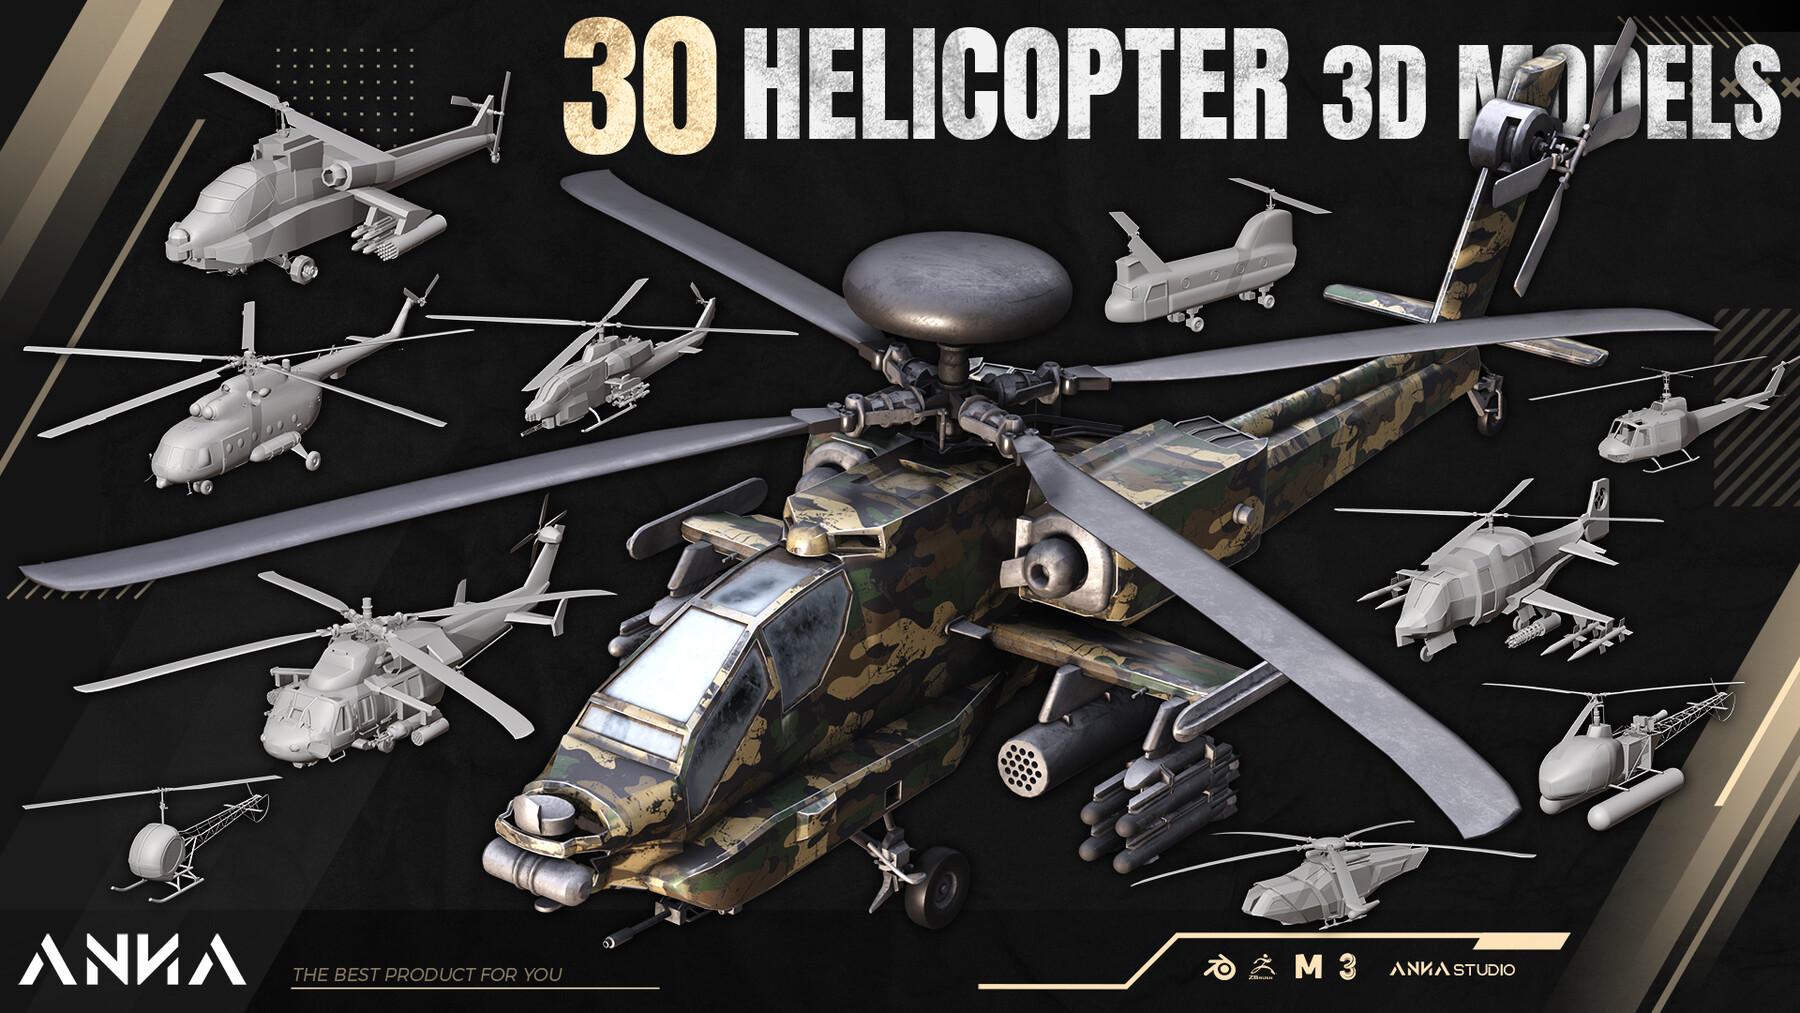 3D Helicopter: Unique Features of 3D Helicopters